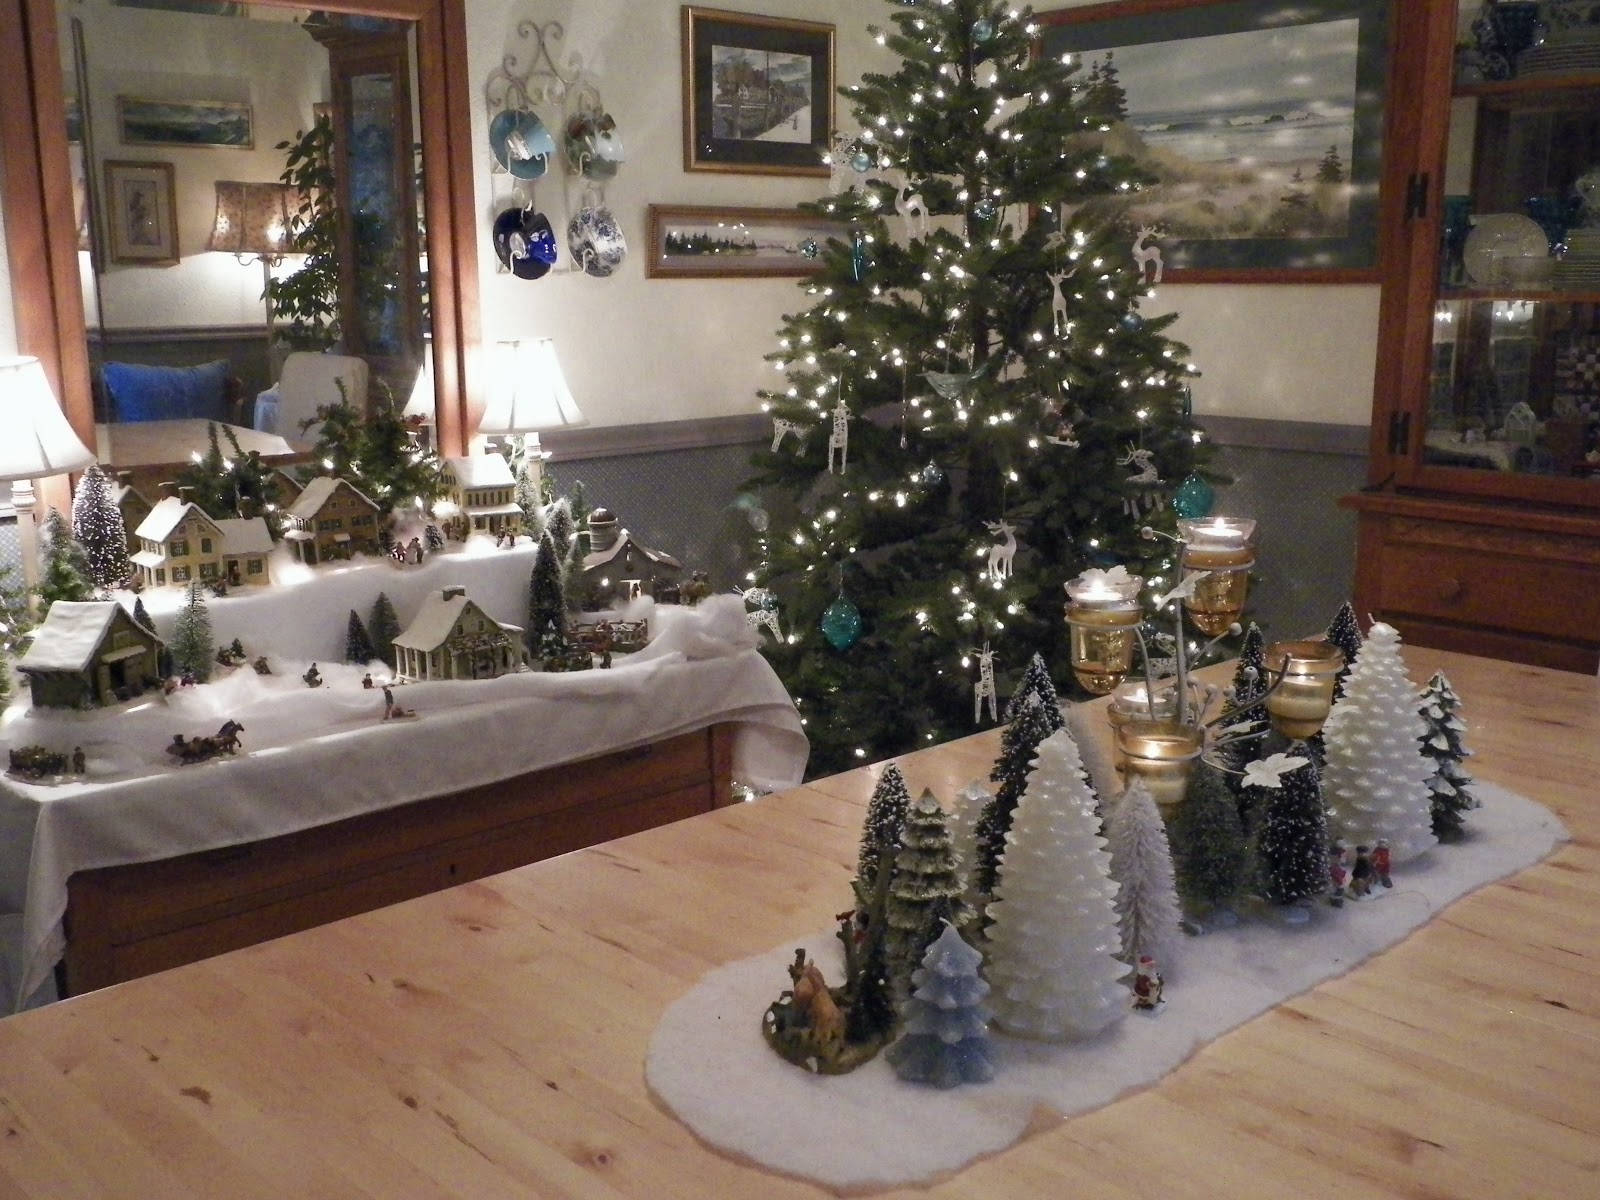 scene on the table is part of our home's Christmas village scene ...